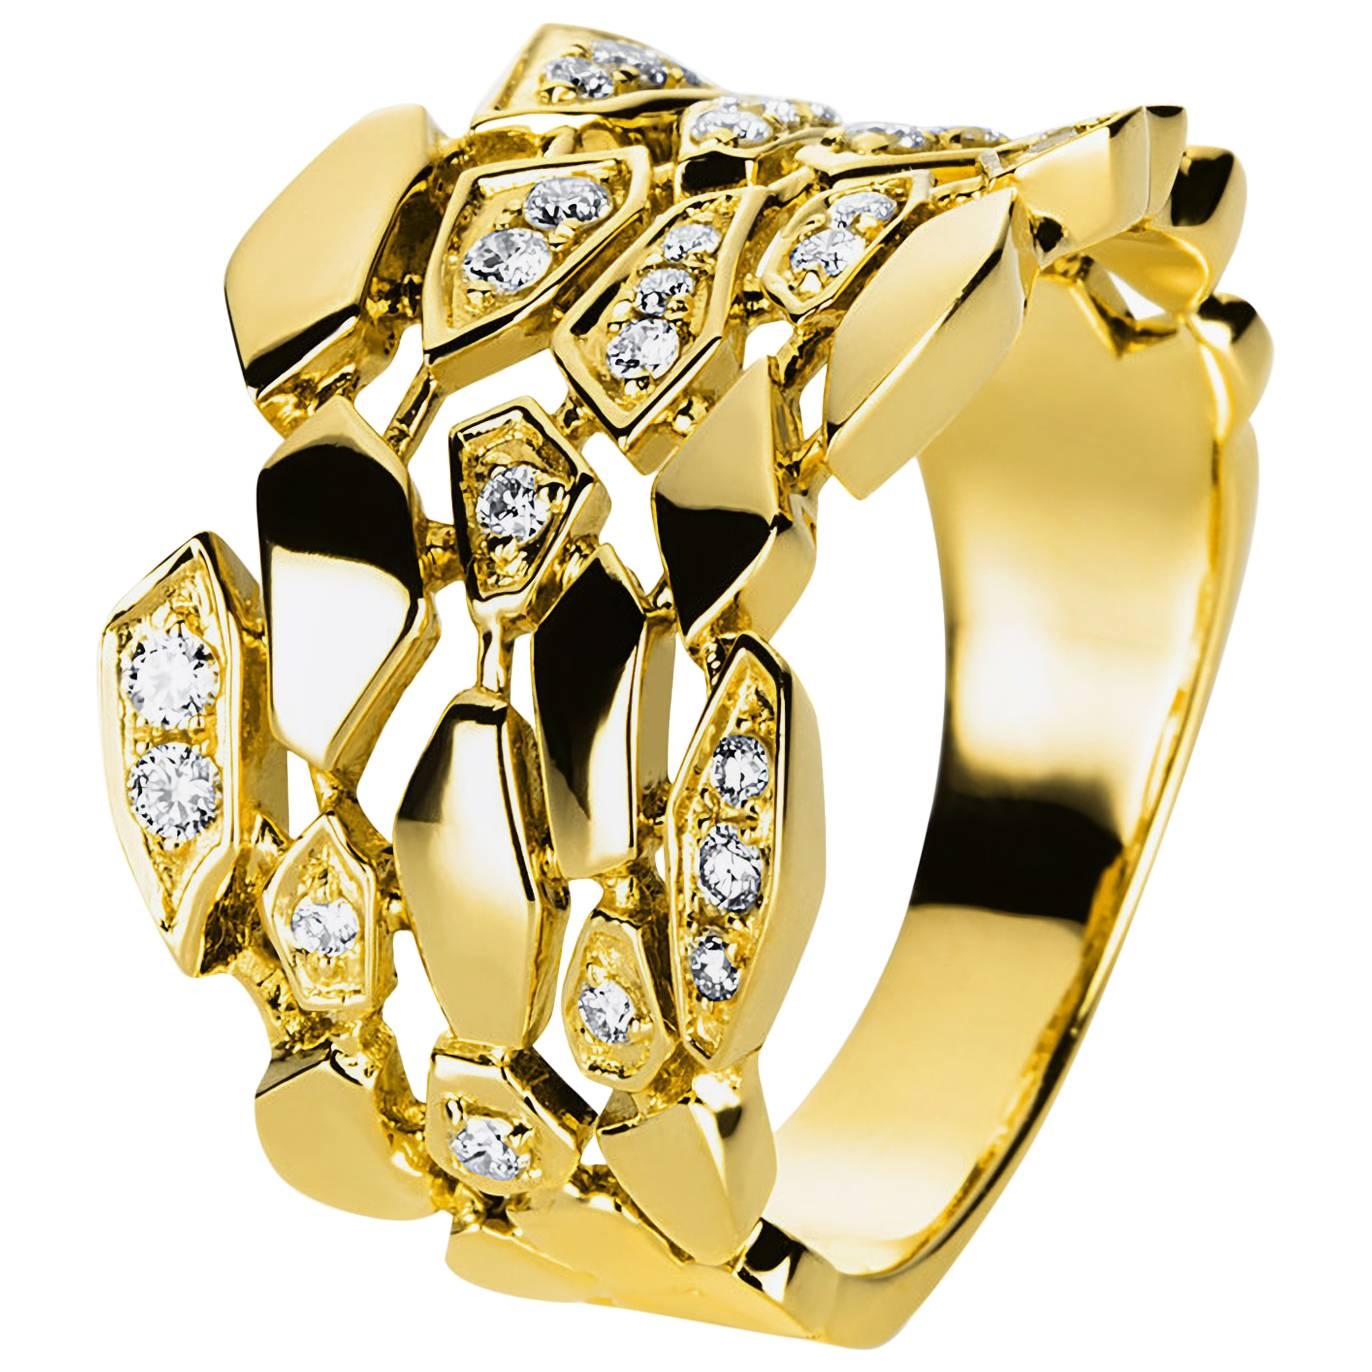 Carlos Udozzo 18 Karat Yellow Gold Ladies Diamond Statement / Cocktail Ring For Sale